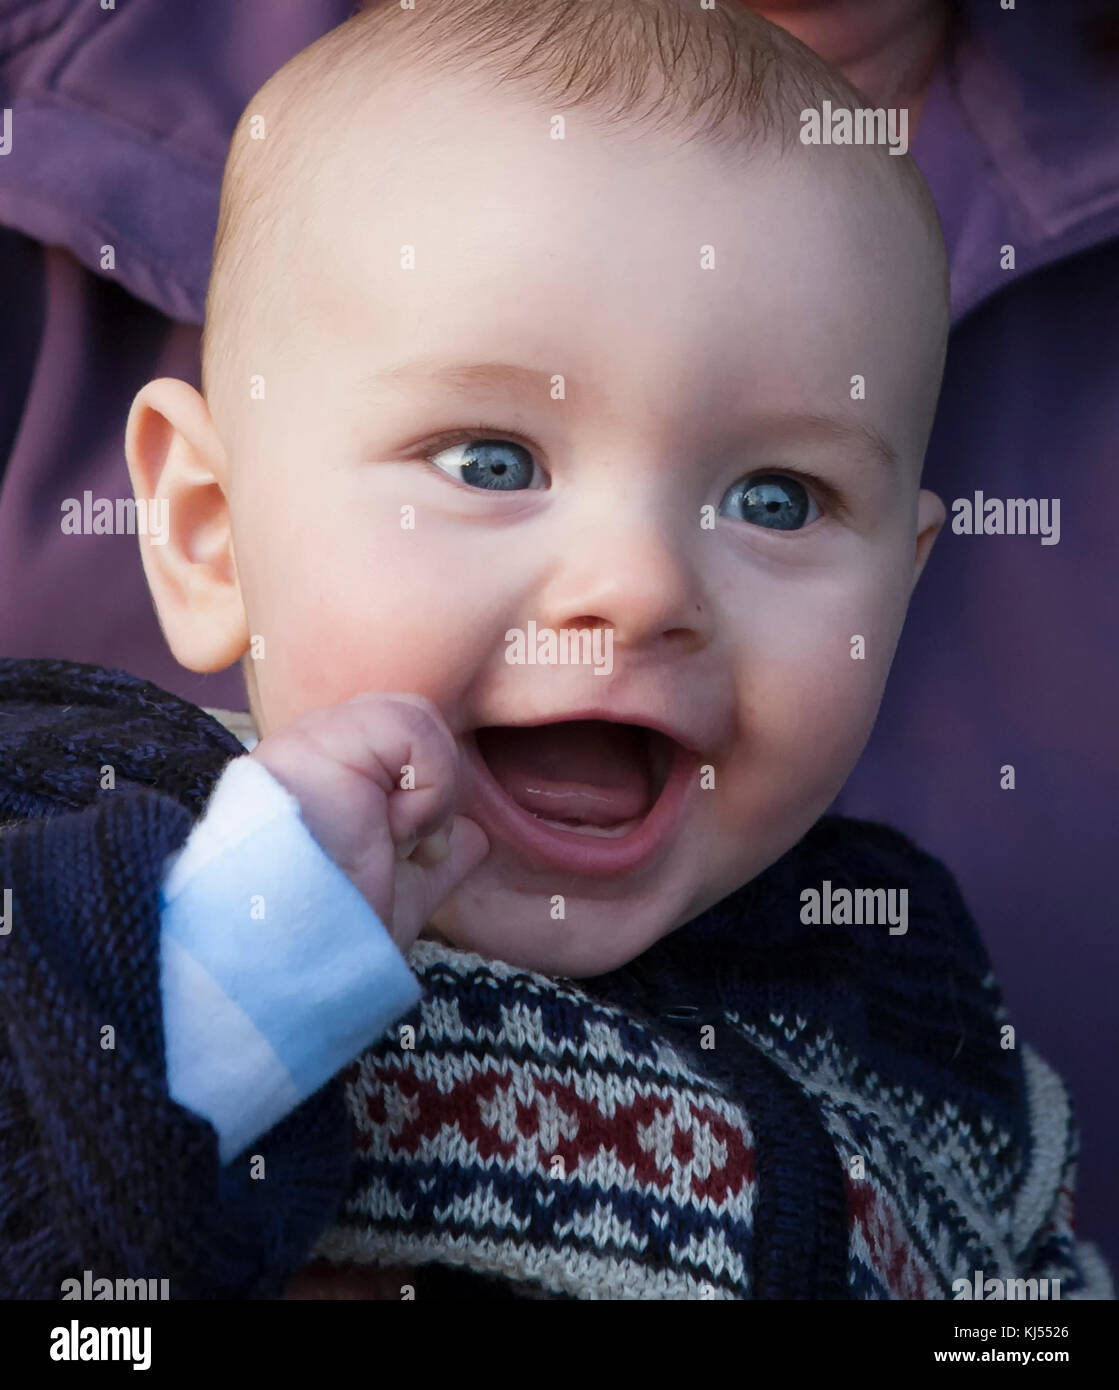 Baby boy, about six months old, laughing happily in close-up   MODEL RELEASED Stock Photo